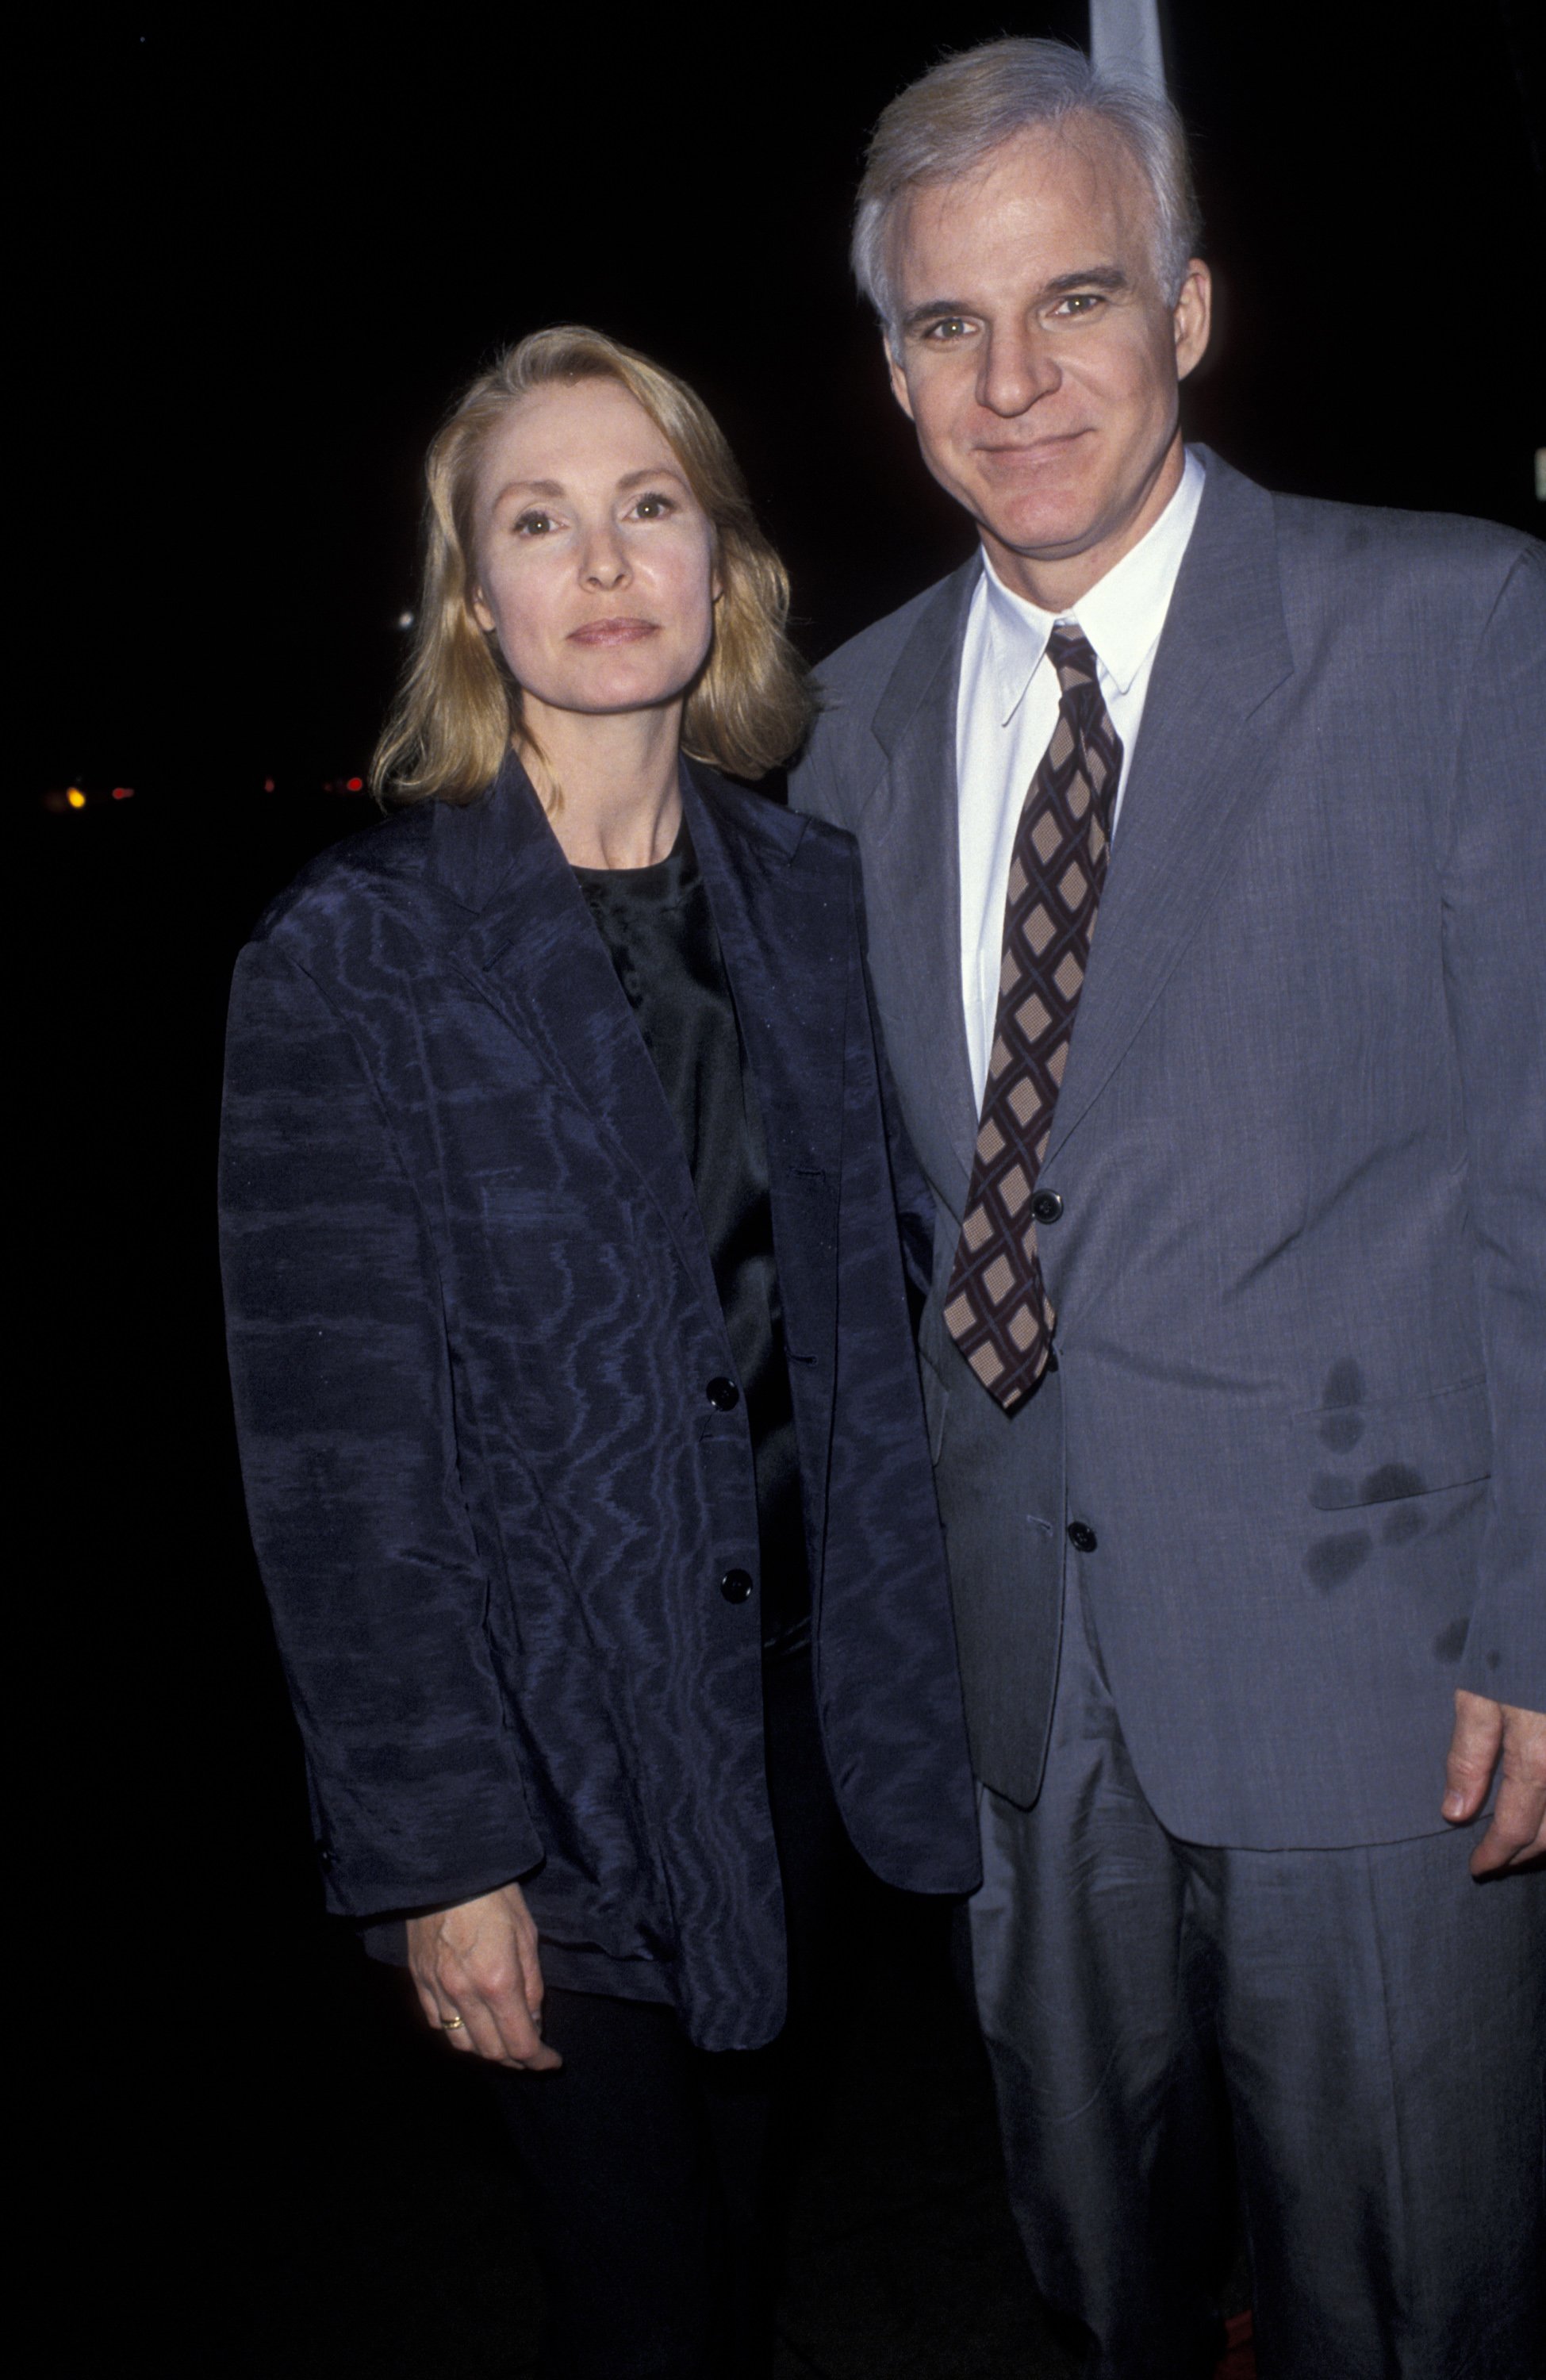 Victoria Tennant and Steve Martin during the Beverly Hills screening of "Leap of Faith" on December 17, 1992, in Beverly Hills, California | Source: Getty Images